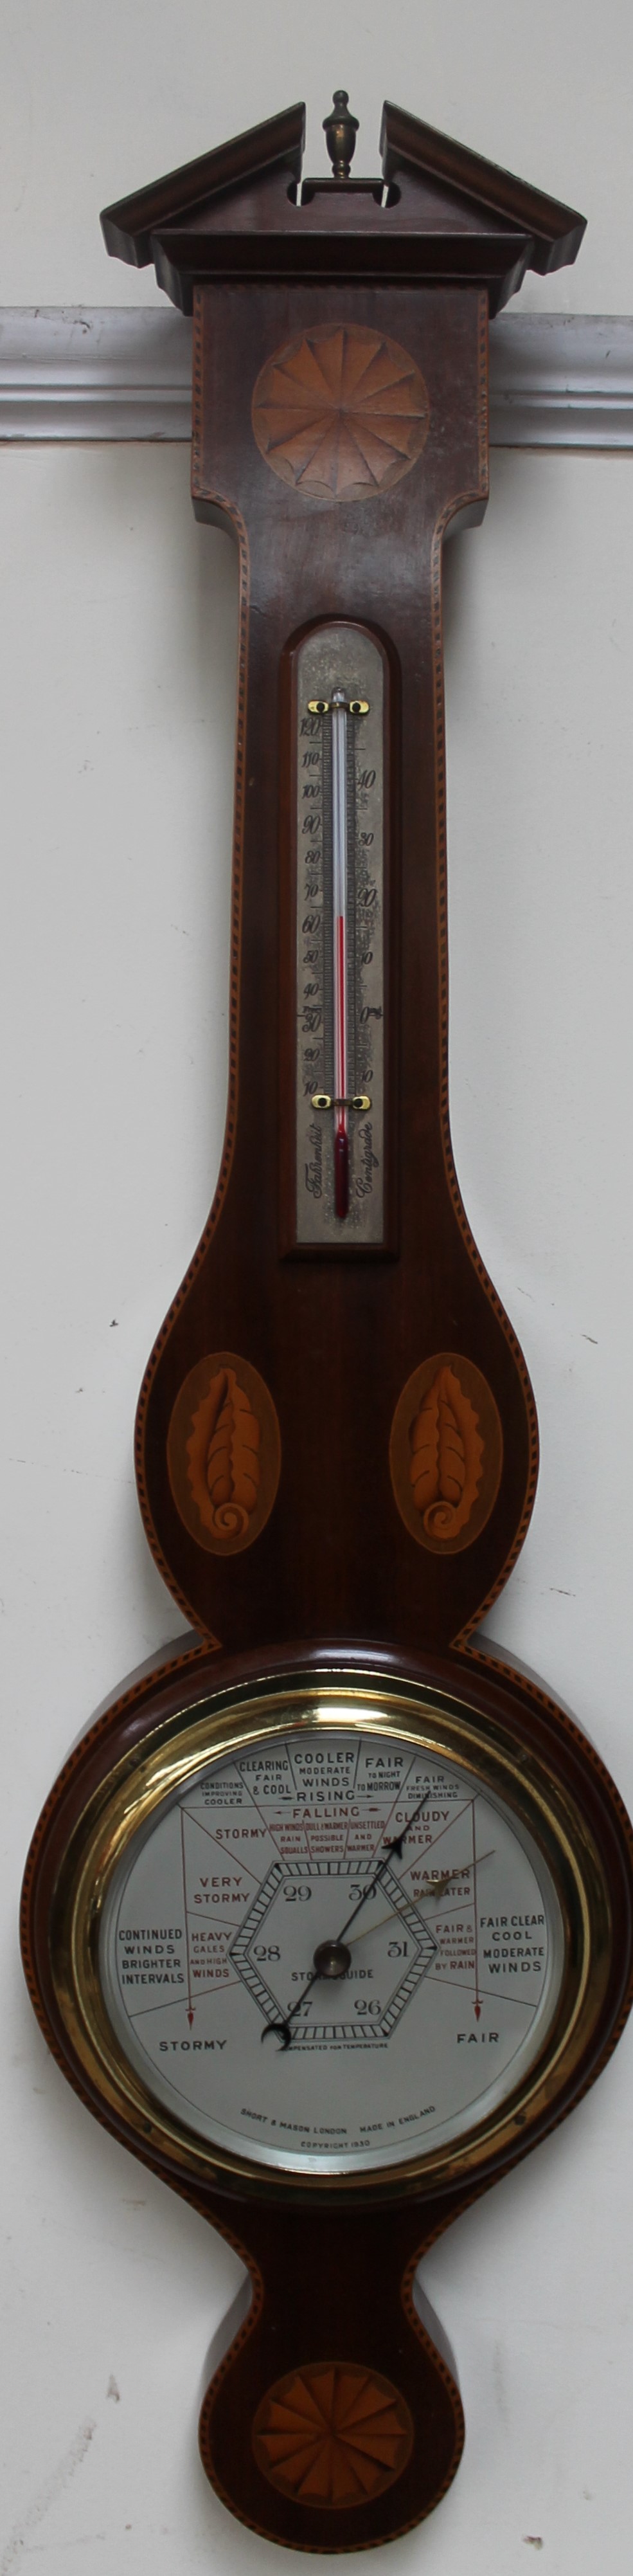 A banjo aneroid barometer with an architectural pediment alcohol thermometer,